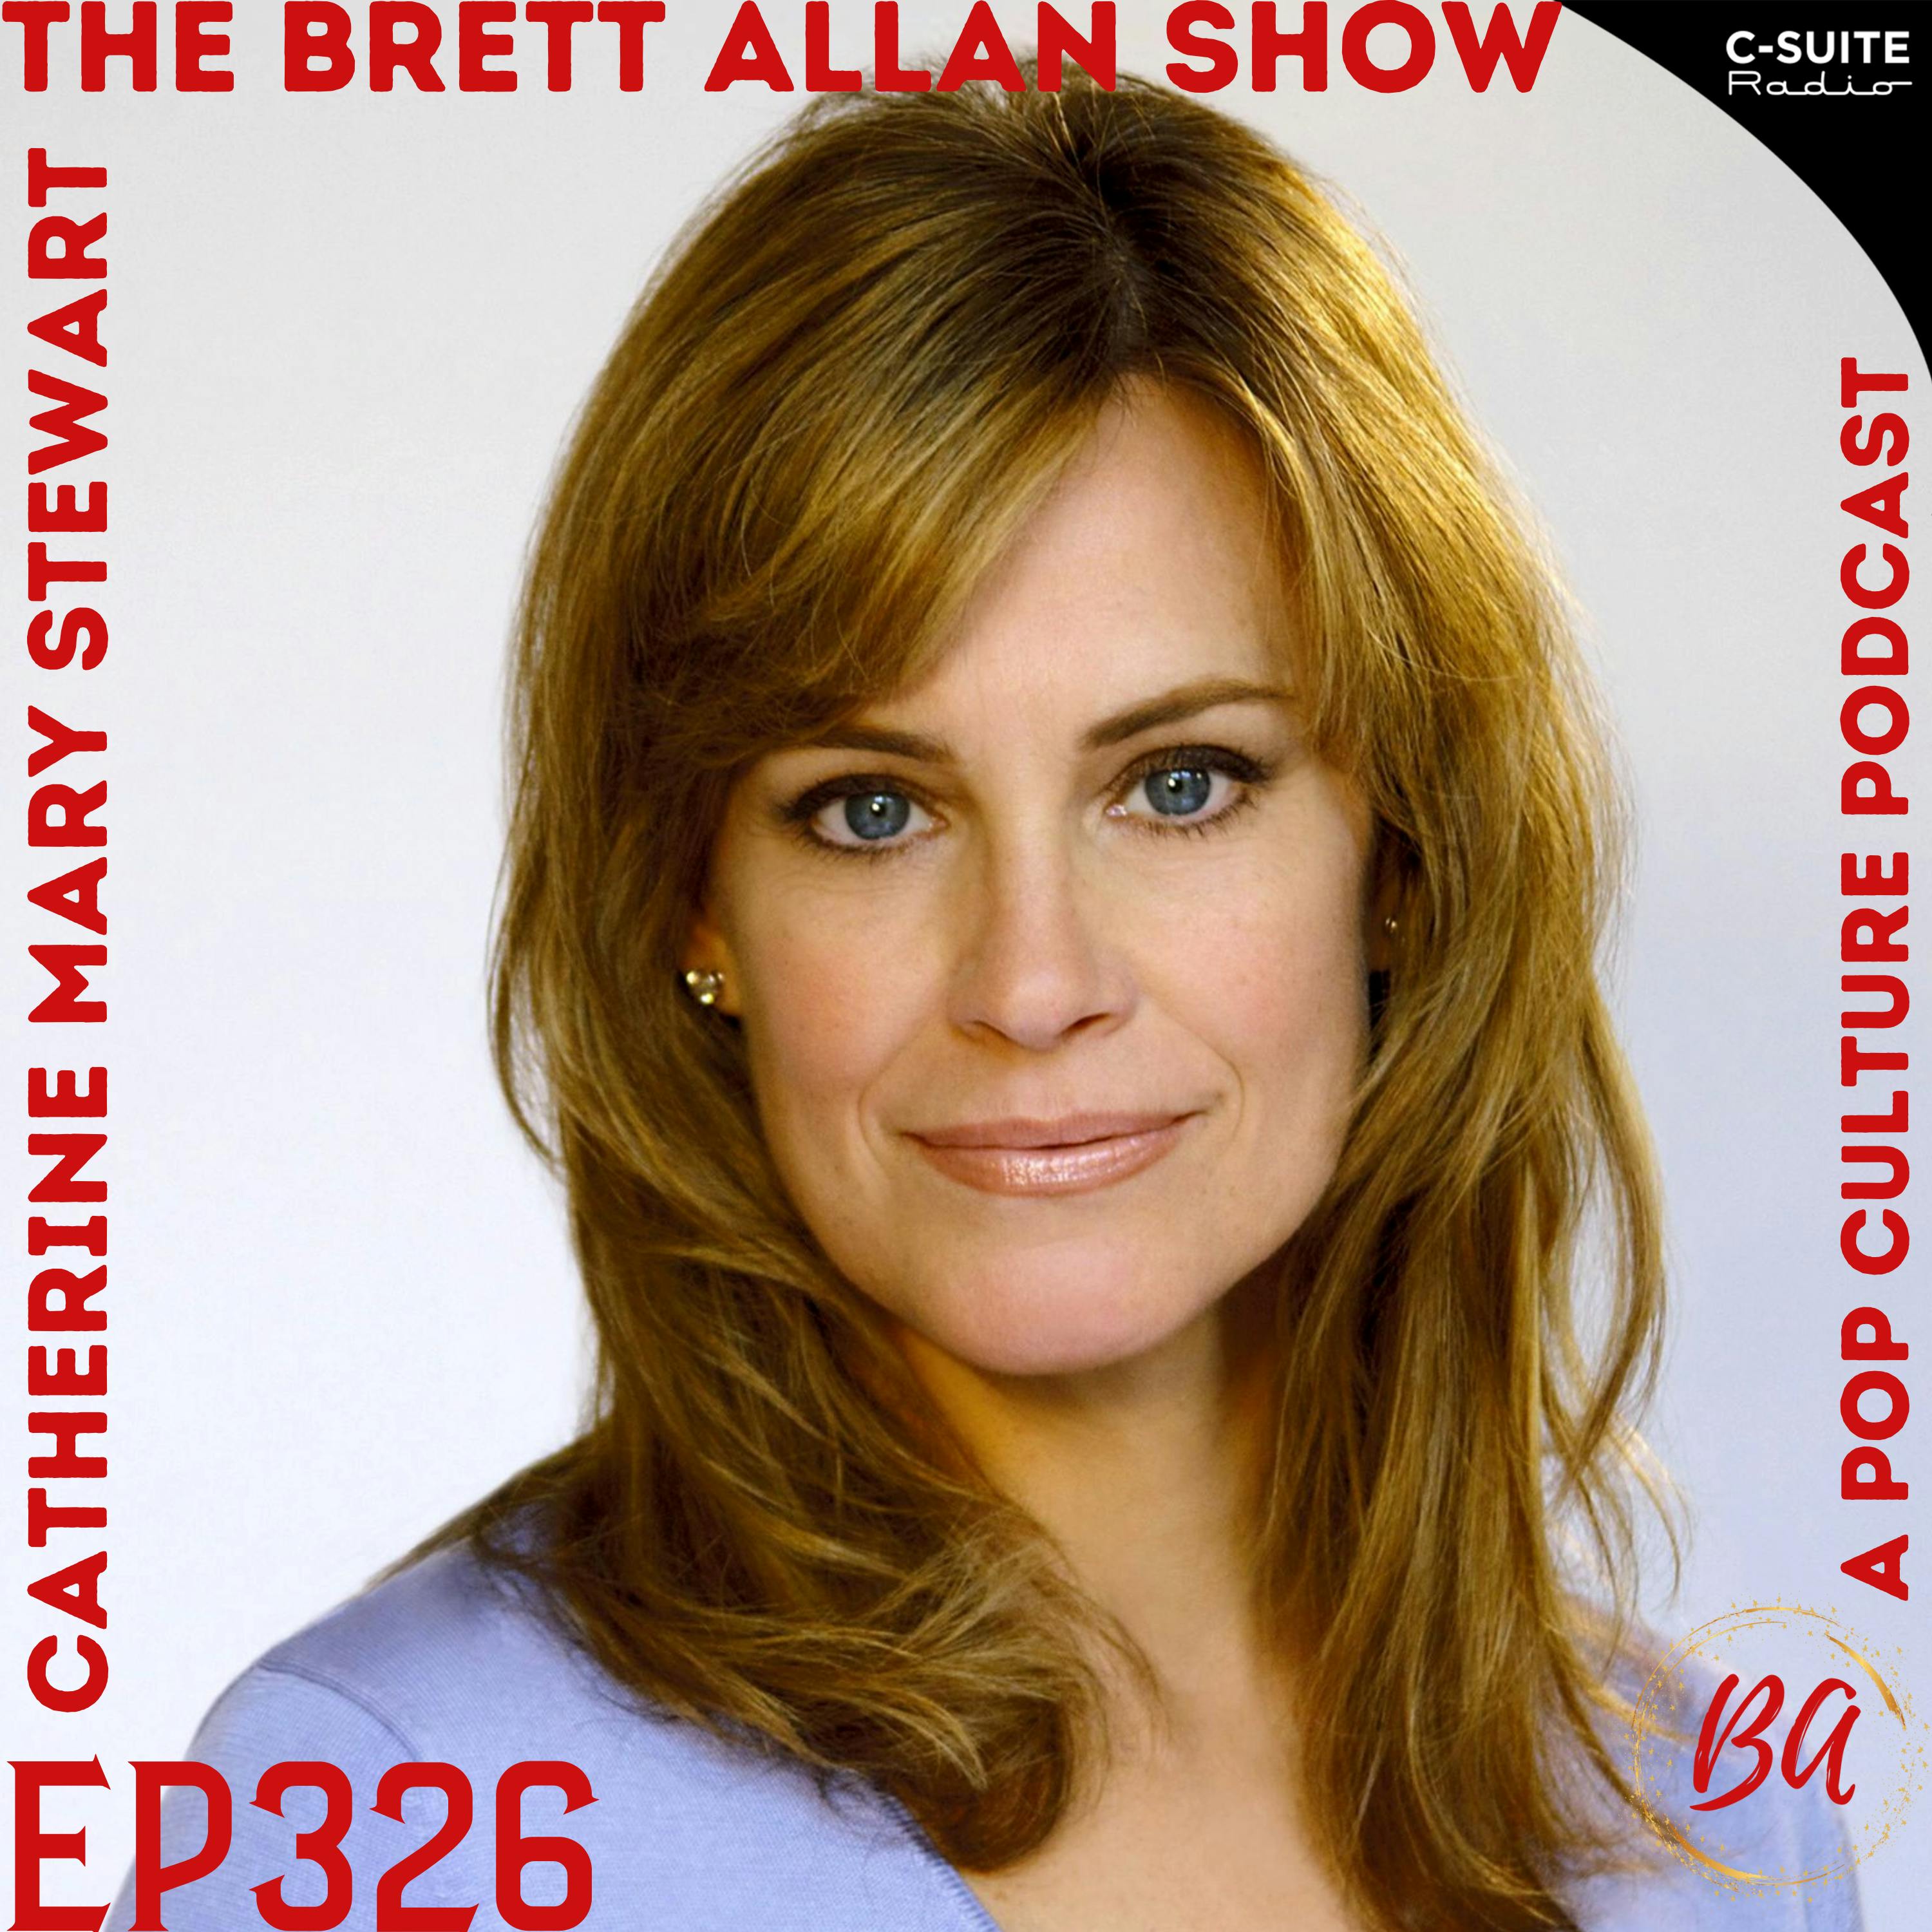 Actress Catherine Mary Stewart Drops In to Chat About Her New Film "Ask Me to Dance"| The Last Starfighter and Weekend at Bernie's Image